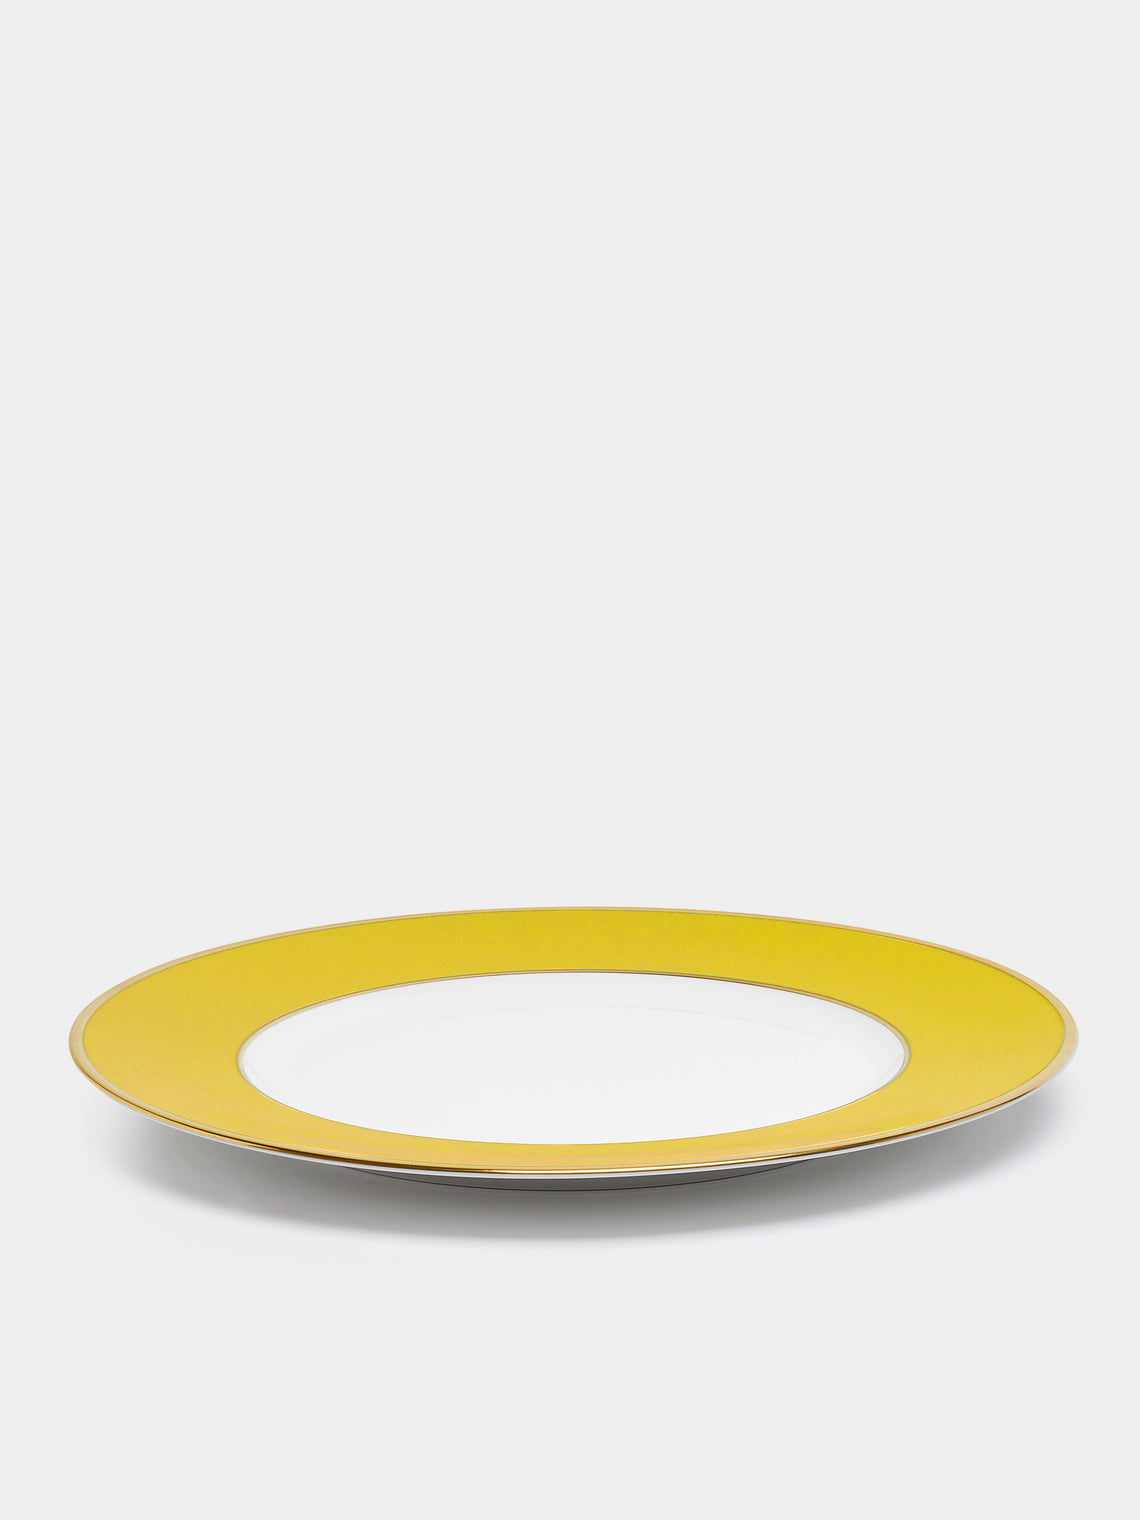 Augarten - Hand-Painted Porcelain Charger Plate - Yellow - ABASK